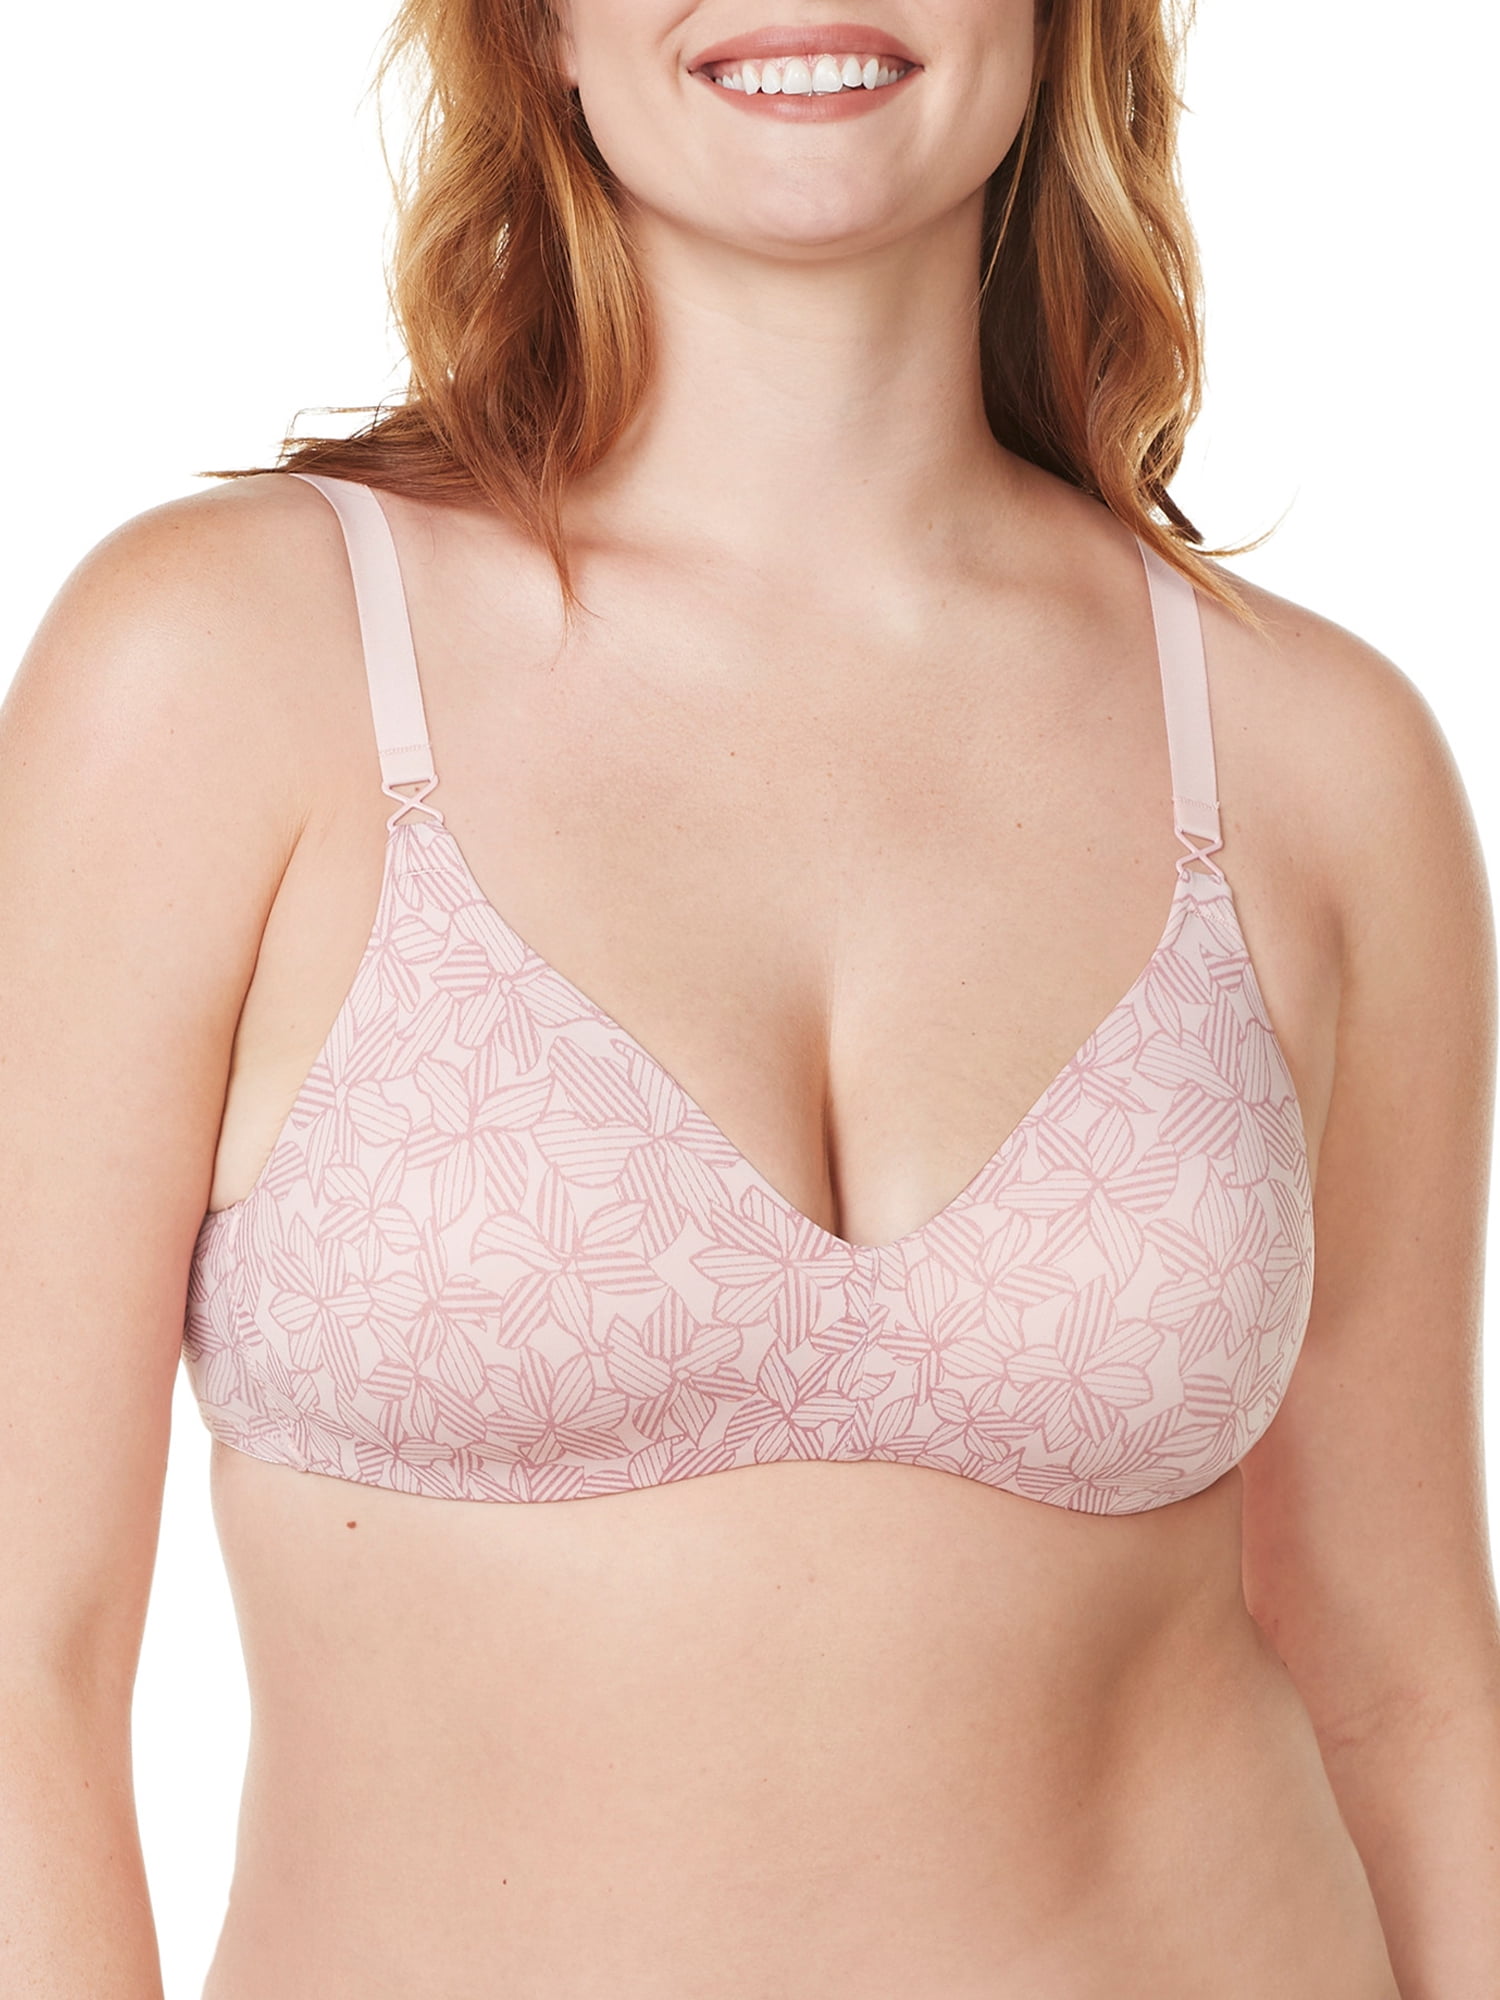 Warners Warner's Simply Perfect Smooth Look Underwire Bra Size 40D Tan -  $18 New With Tags - From MamaBears